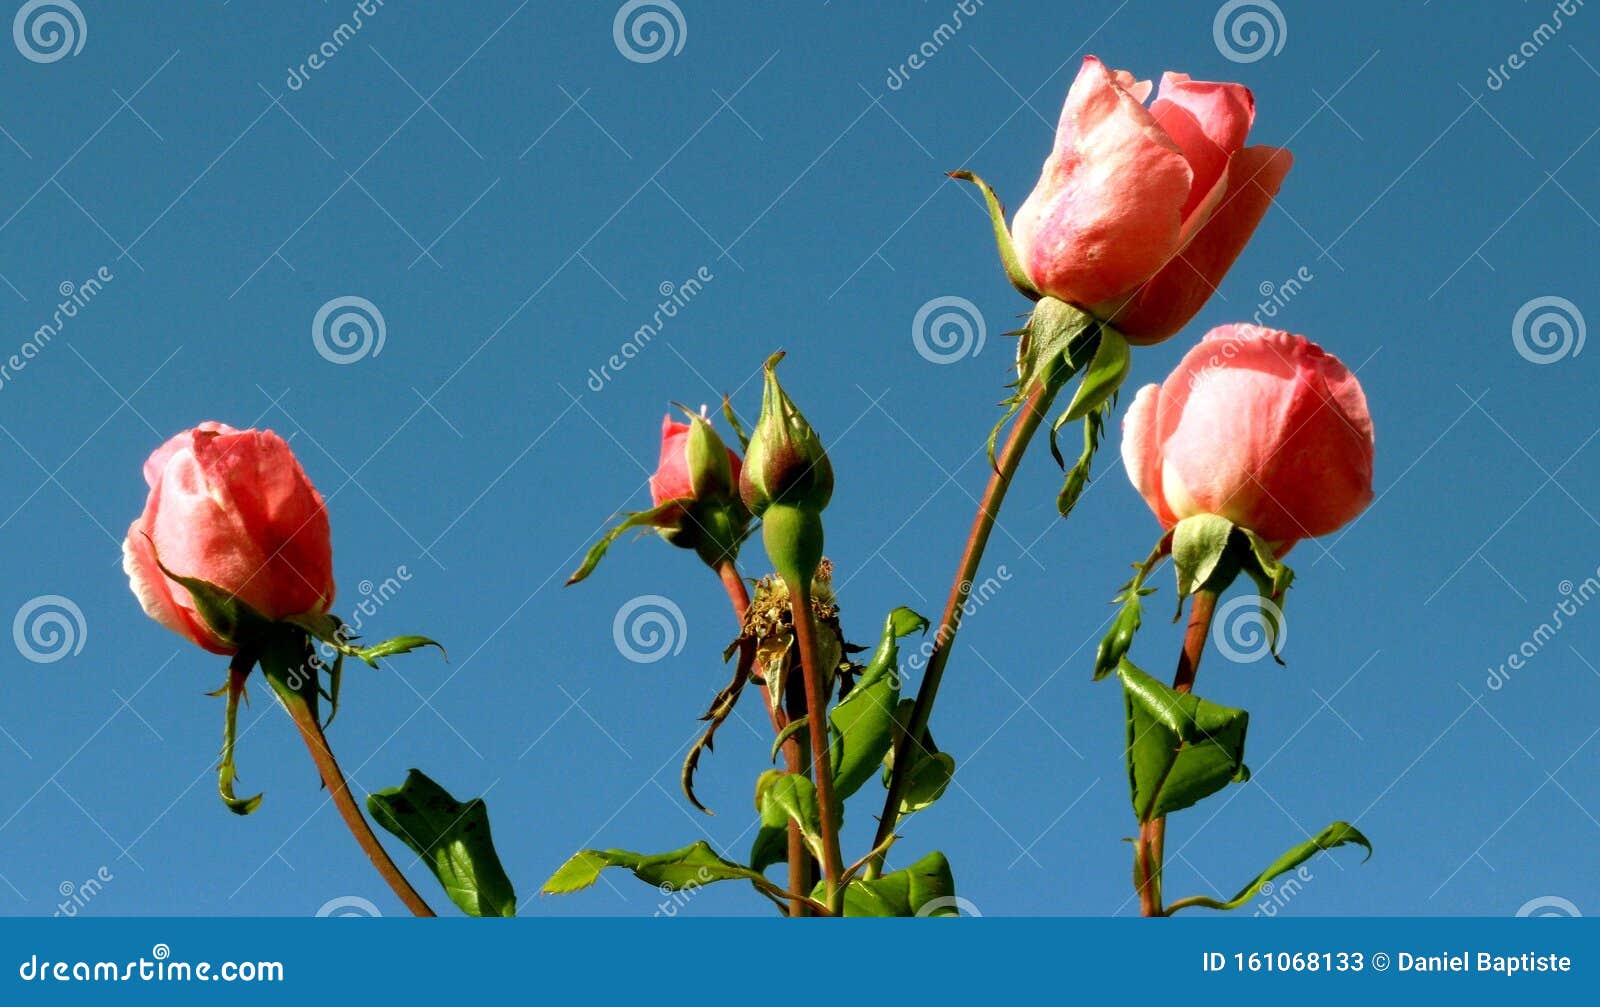 Rose Shrub Thorny Grown for Its Fragrant Flowers, Roses. Stock Image ...